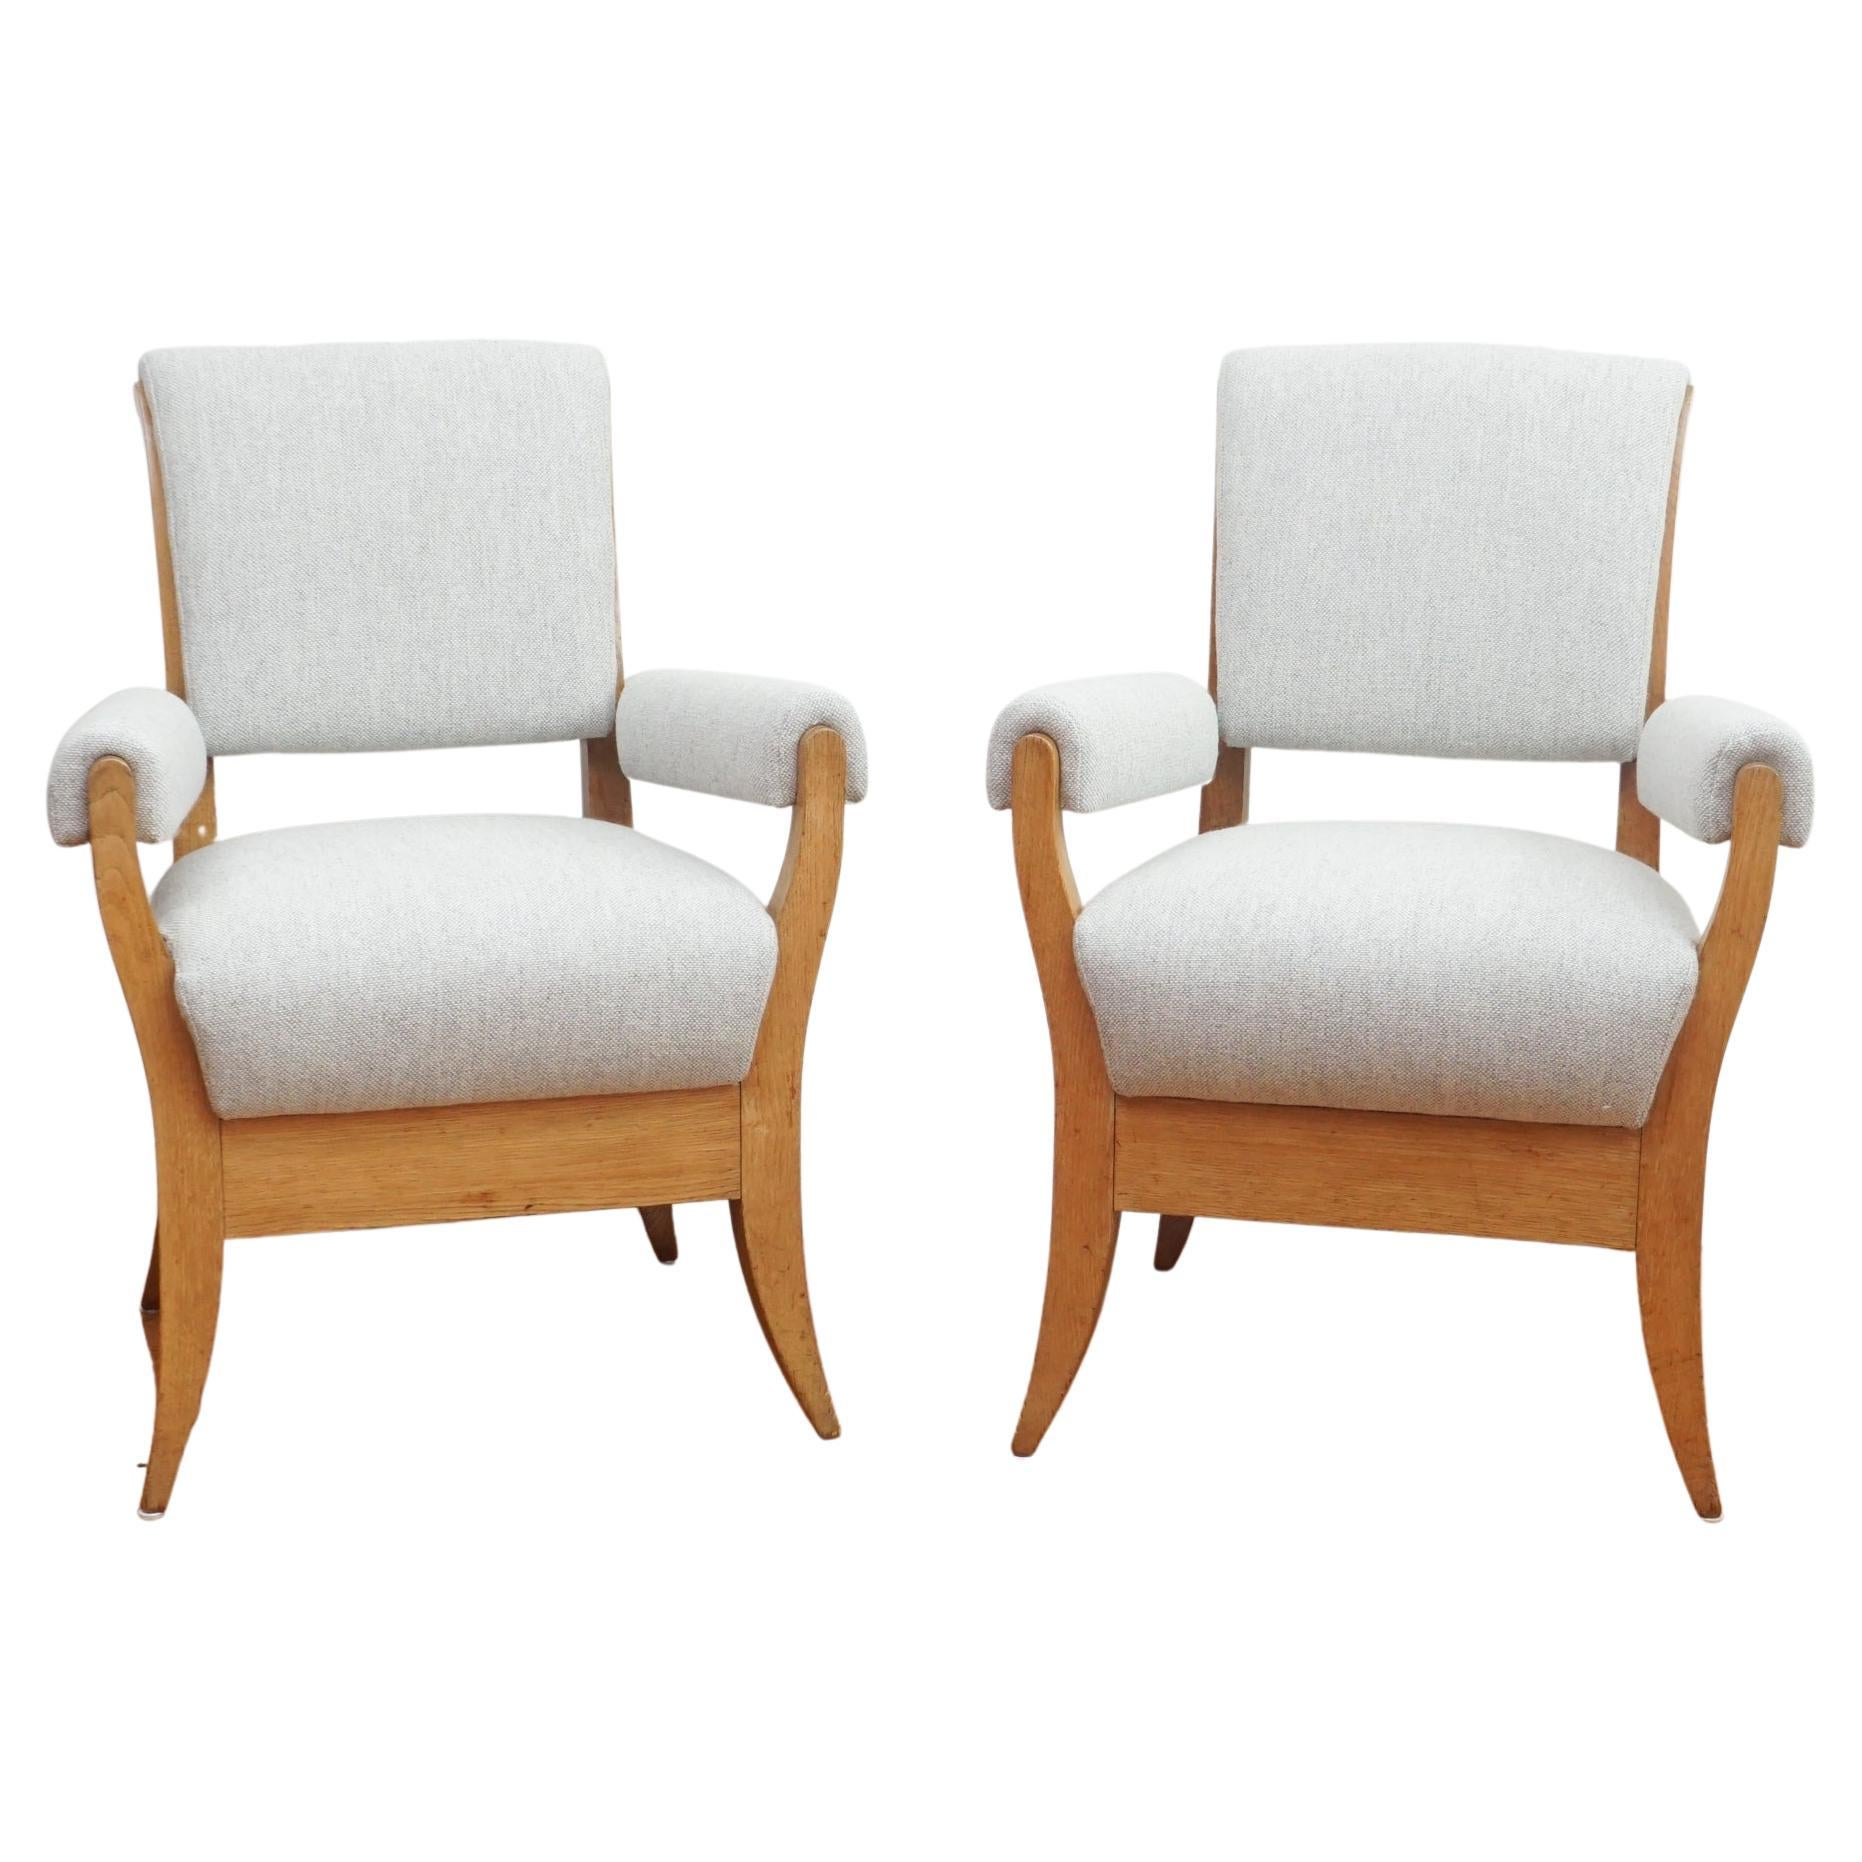 Pair of Newly Upholstered Oak Armchairs C. 1945 For Sale